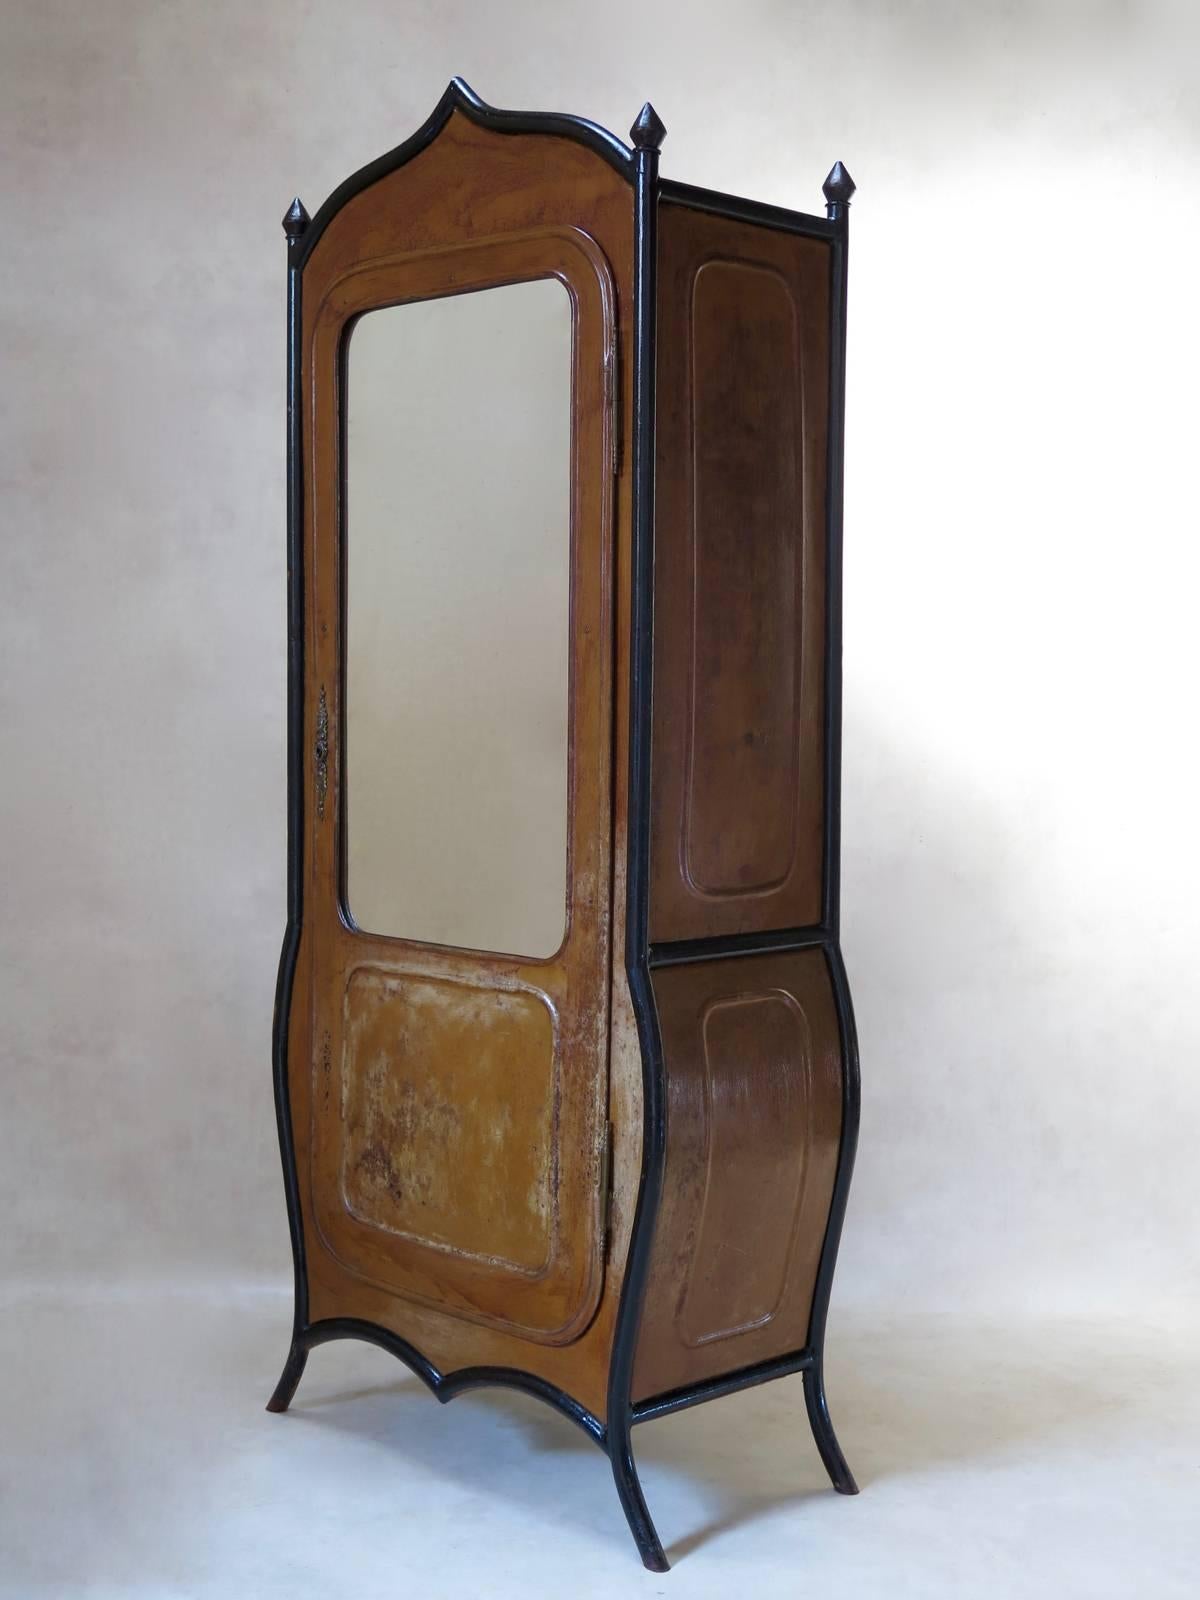 Very unusual Napoleon III iron cabinet, painted with a wood trompe-l'oeil. Elegantly outlined in black tubular iron, lending definition to its elegant lines: the bombé bottom section, the cabriole legs, and the ogee-shaped top, as well as the